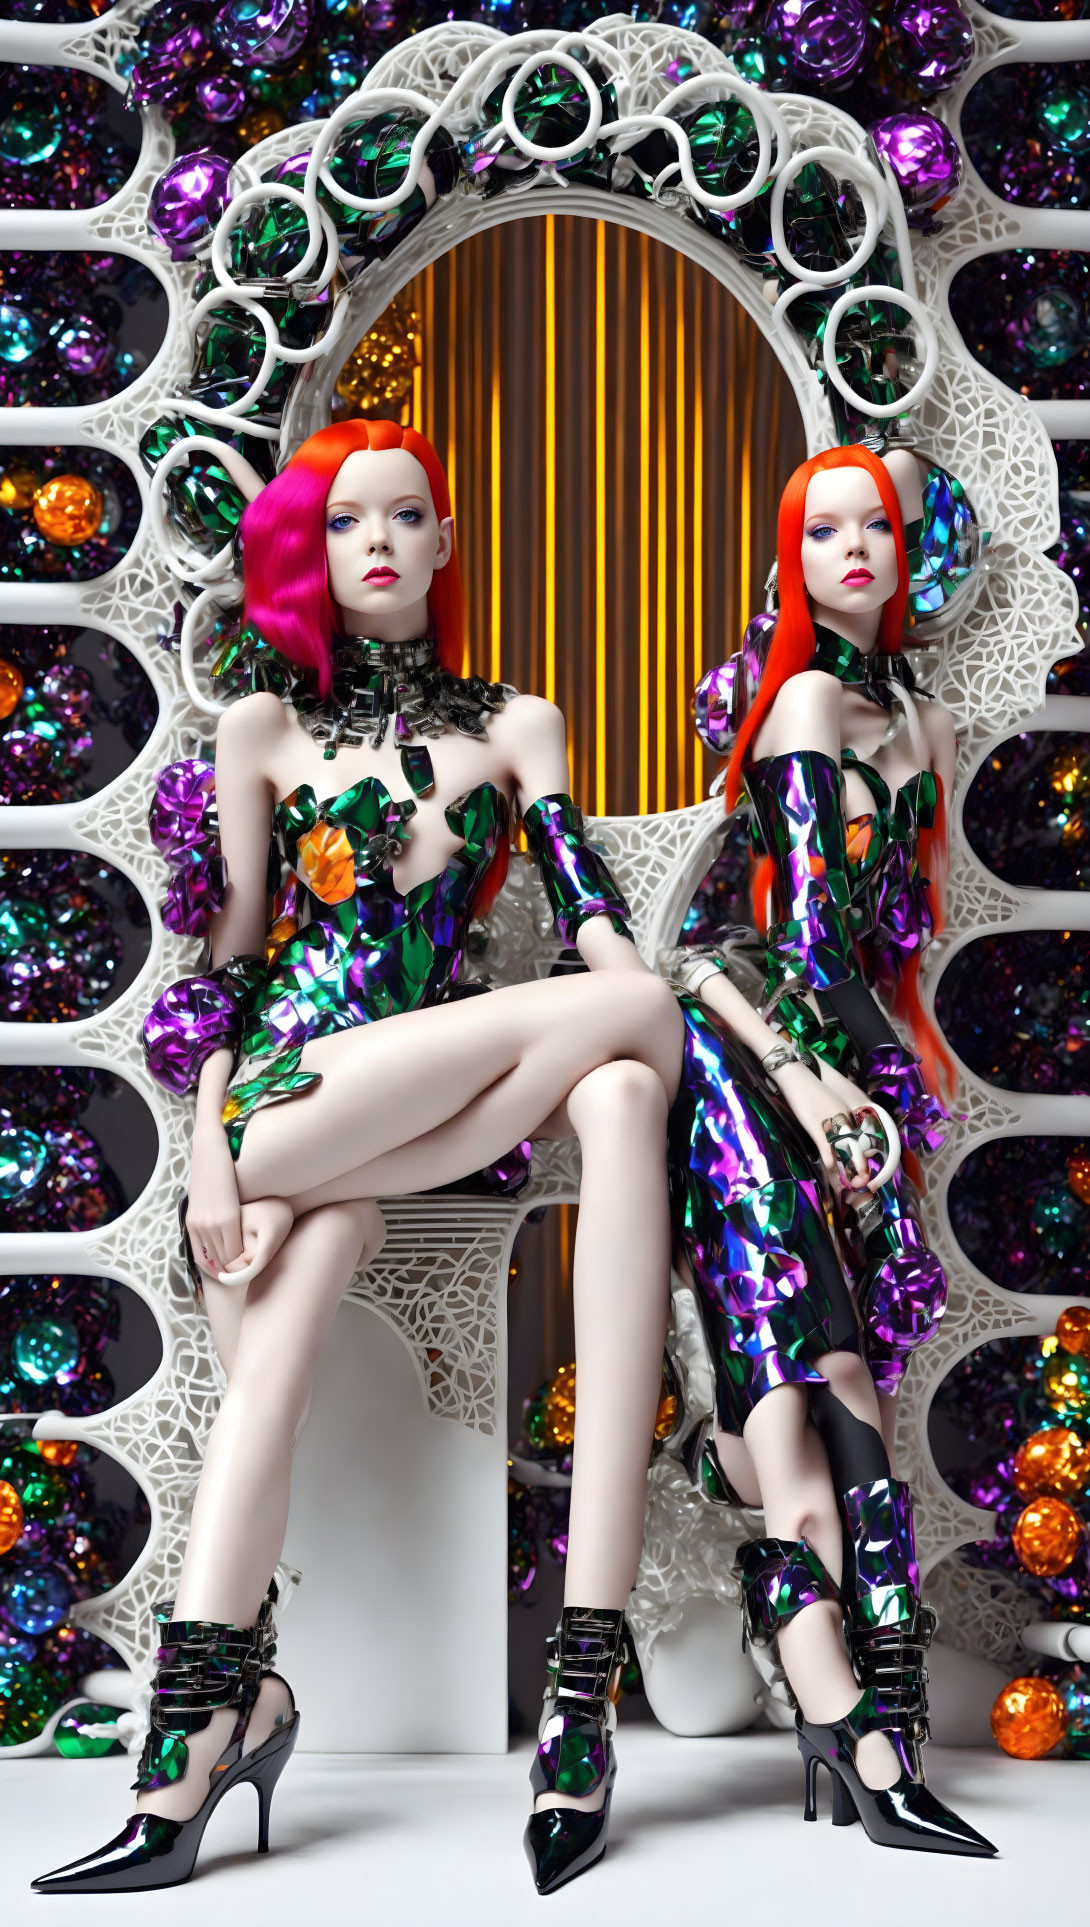 Colorful hair mannequins in metallic floral dresses mirror pose with shiny spheres